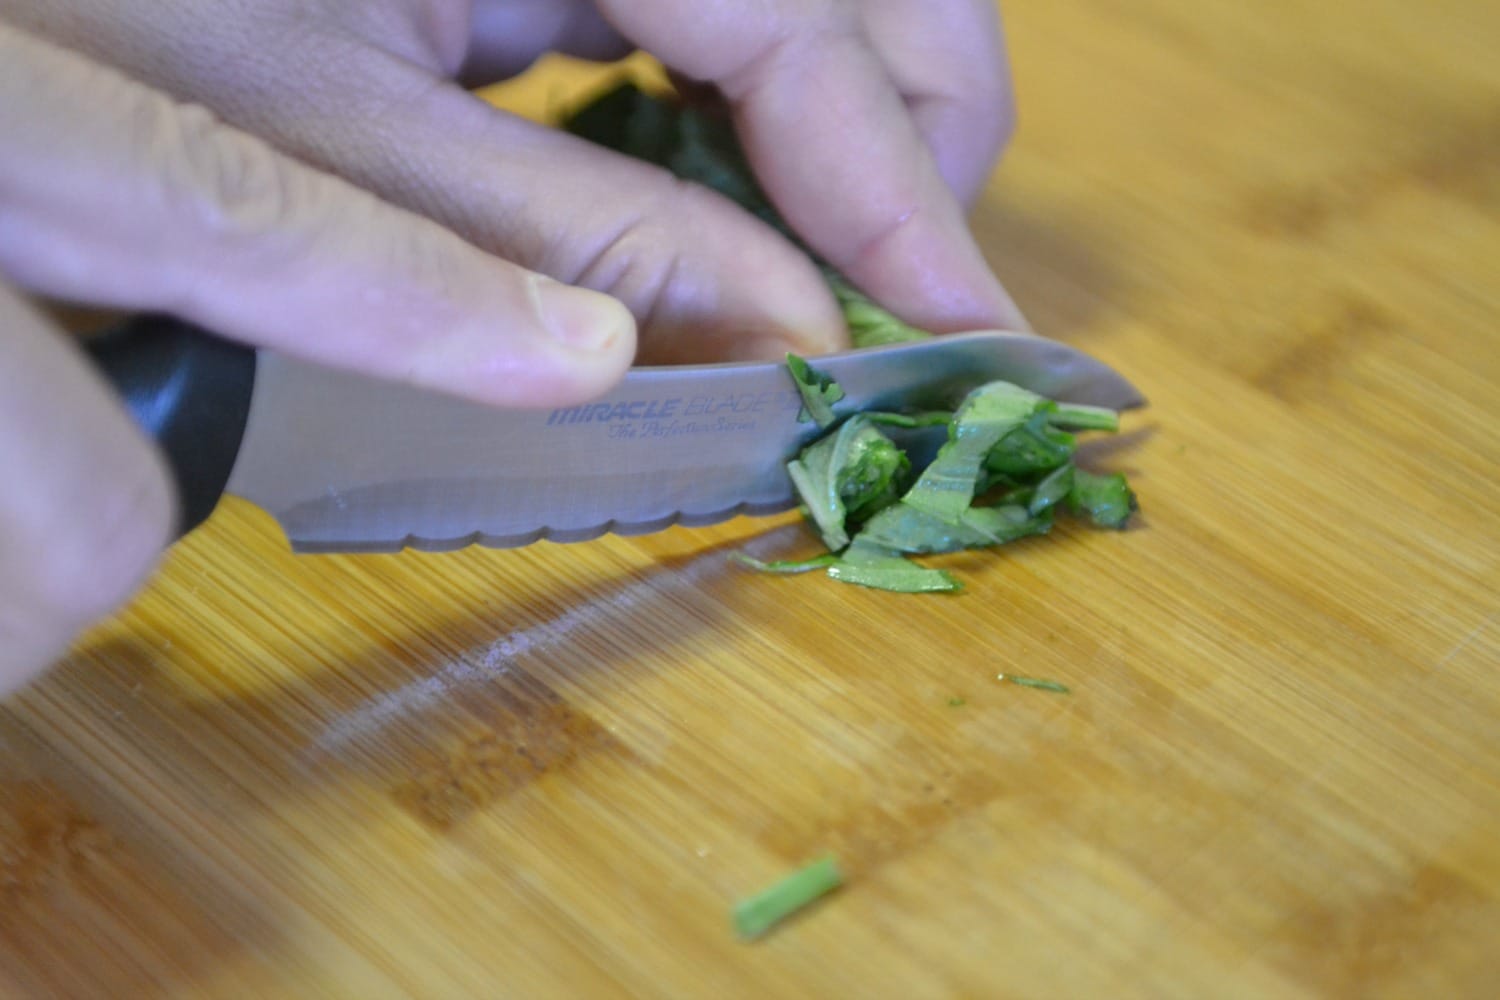 To cut basil, roll the basil leaves and chop. 